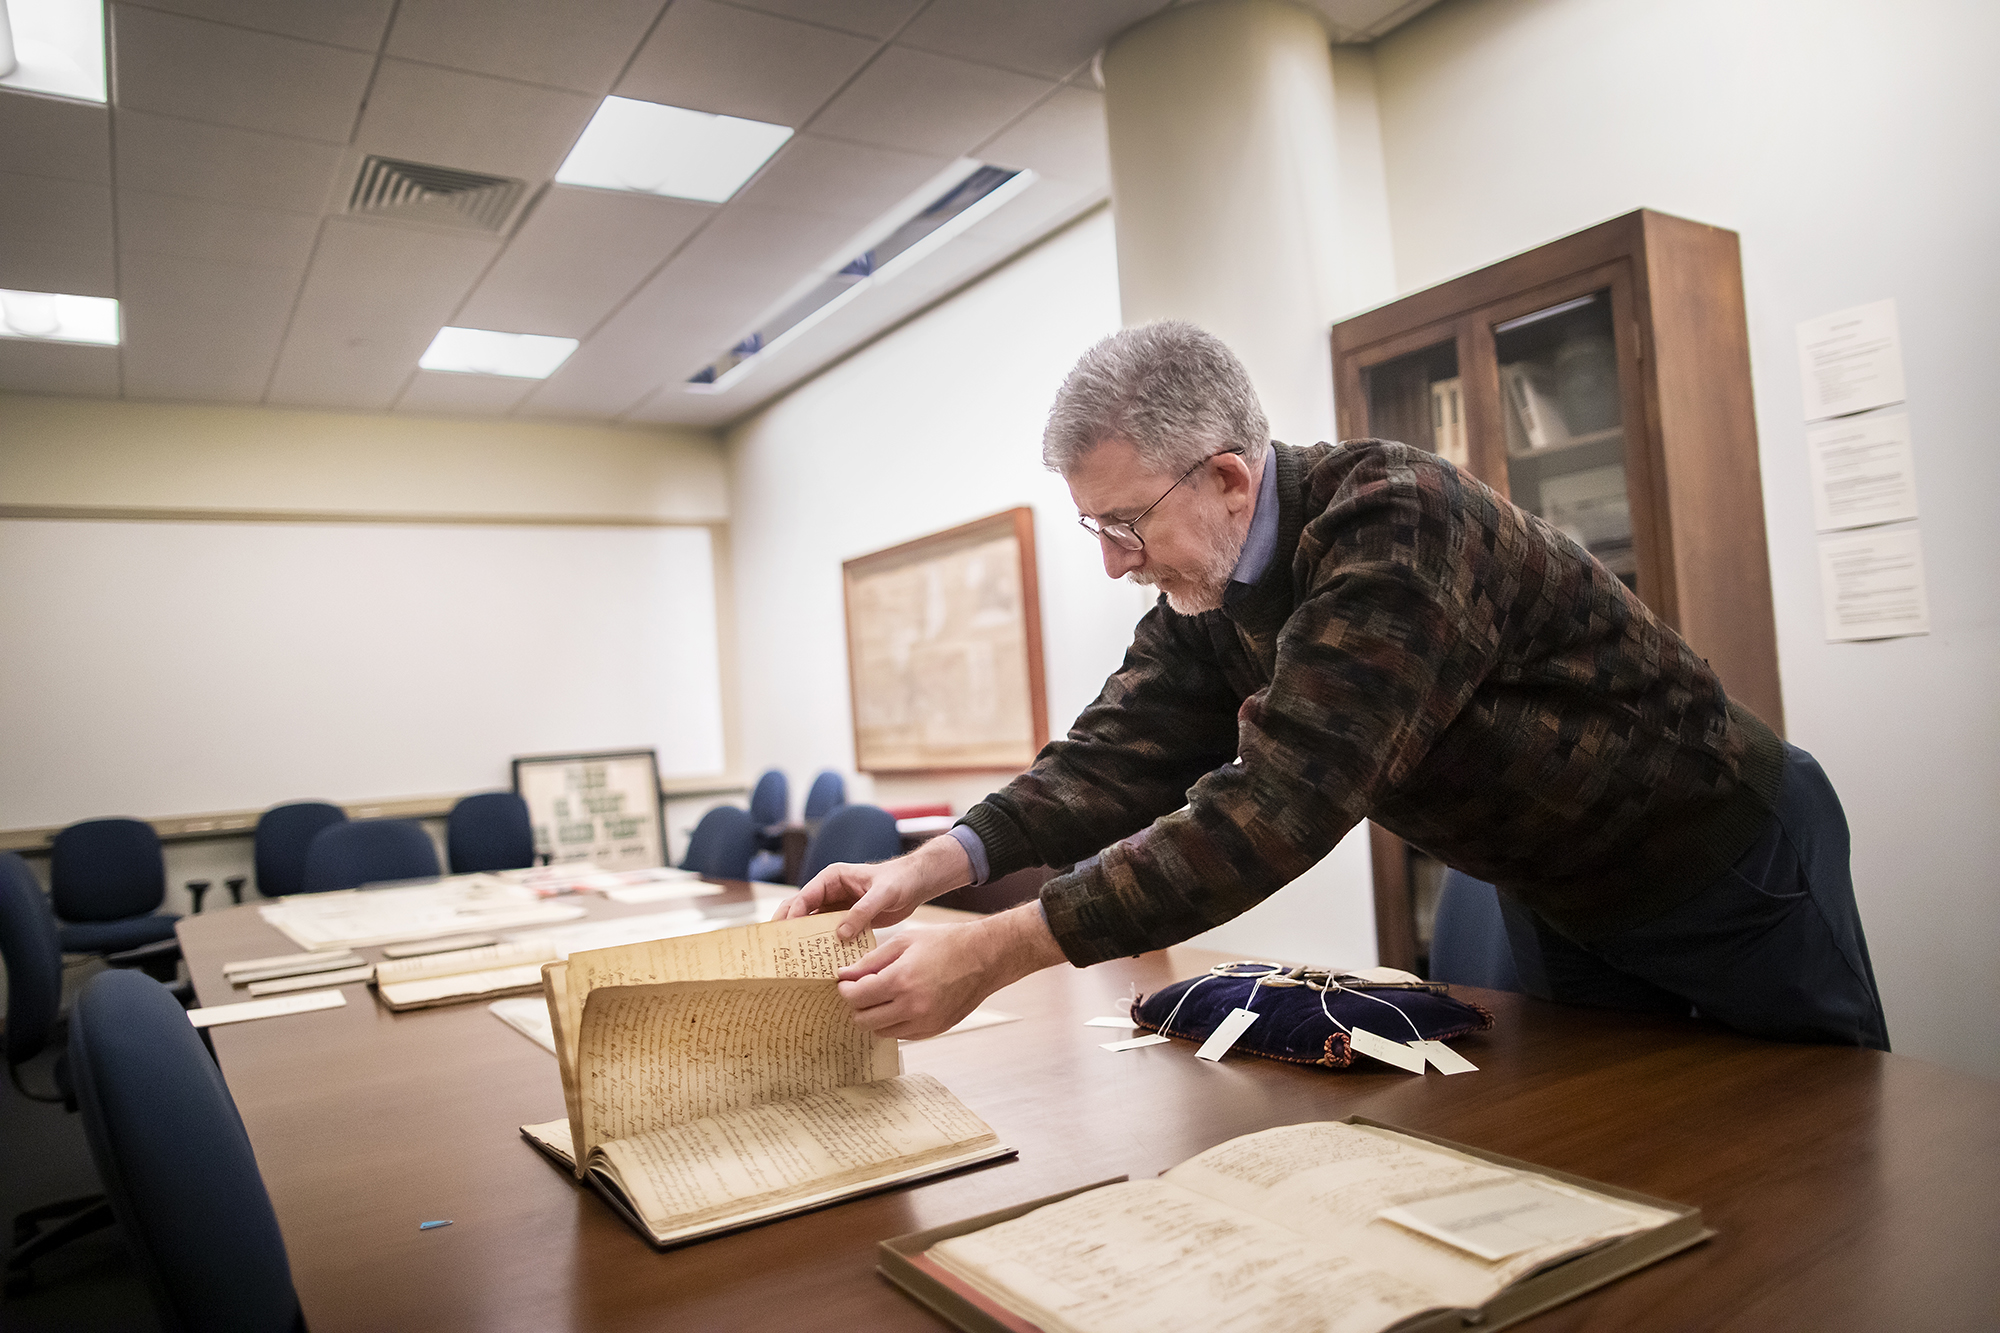 Archives curator flipping through pages of a historic book from the Penn Archives.